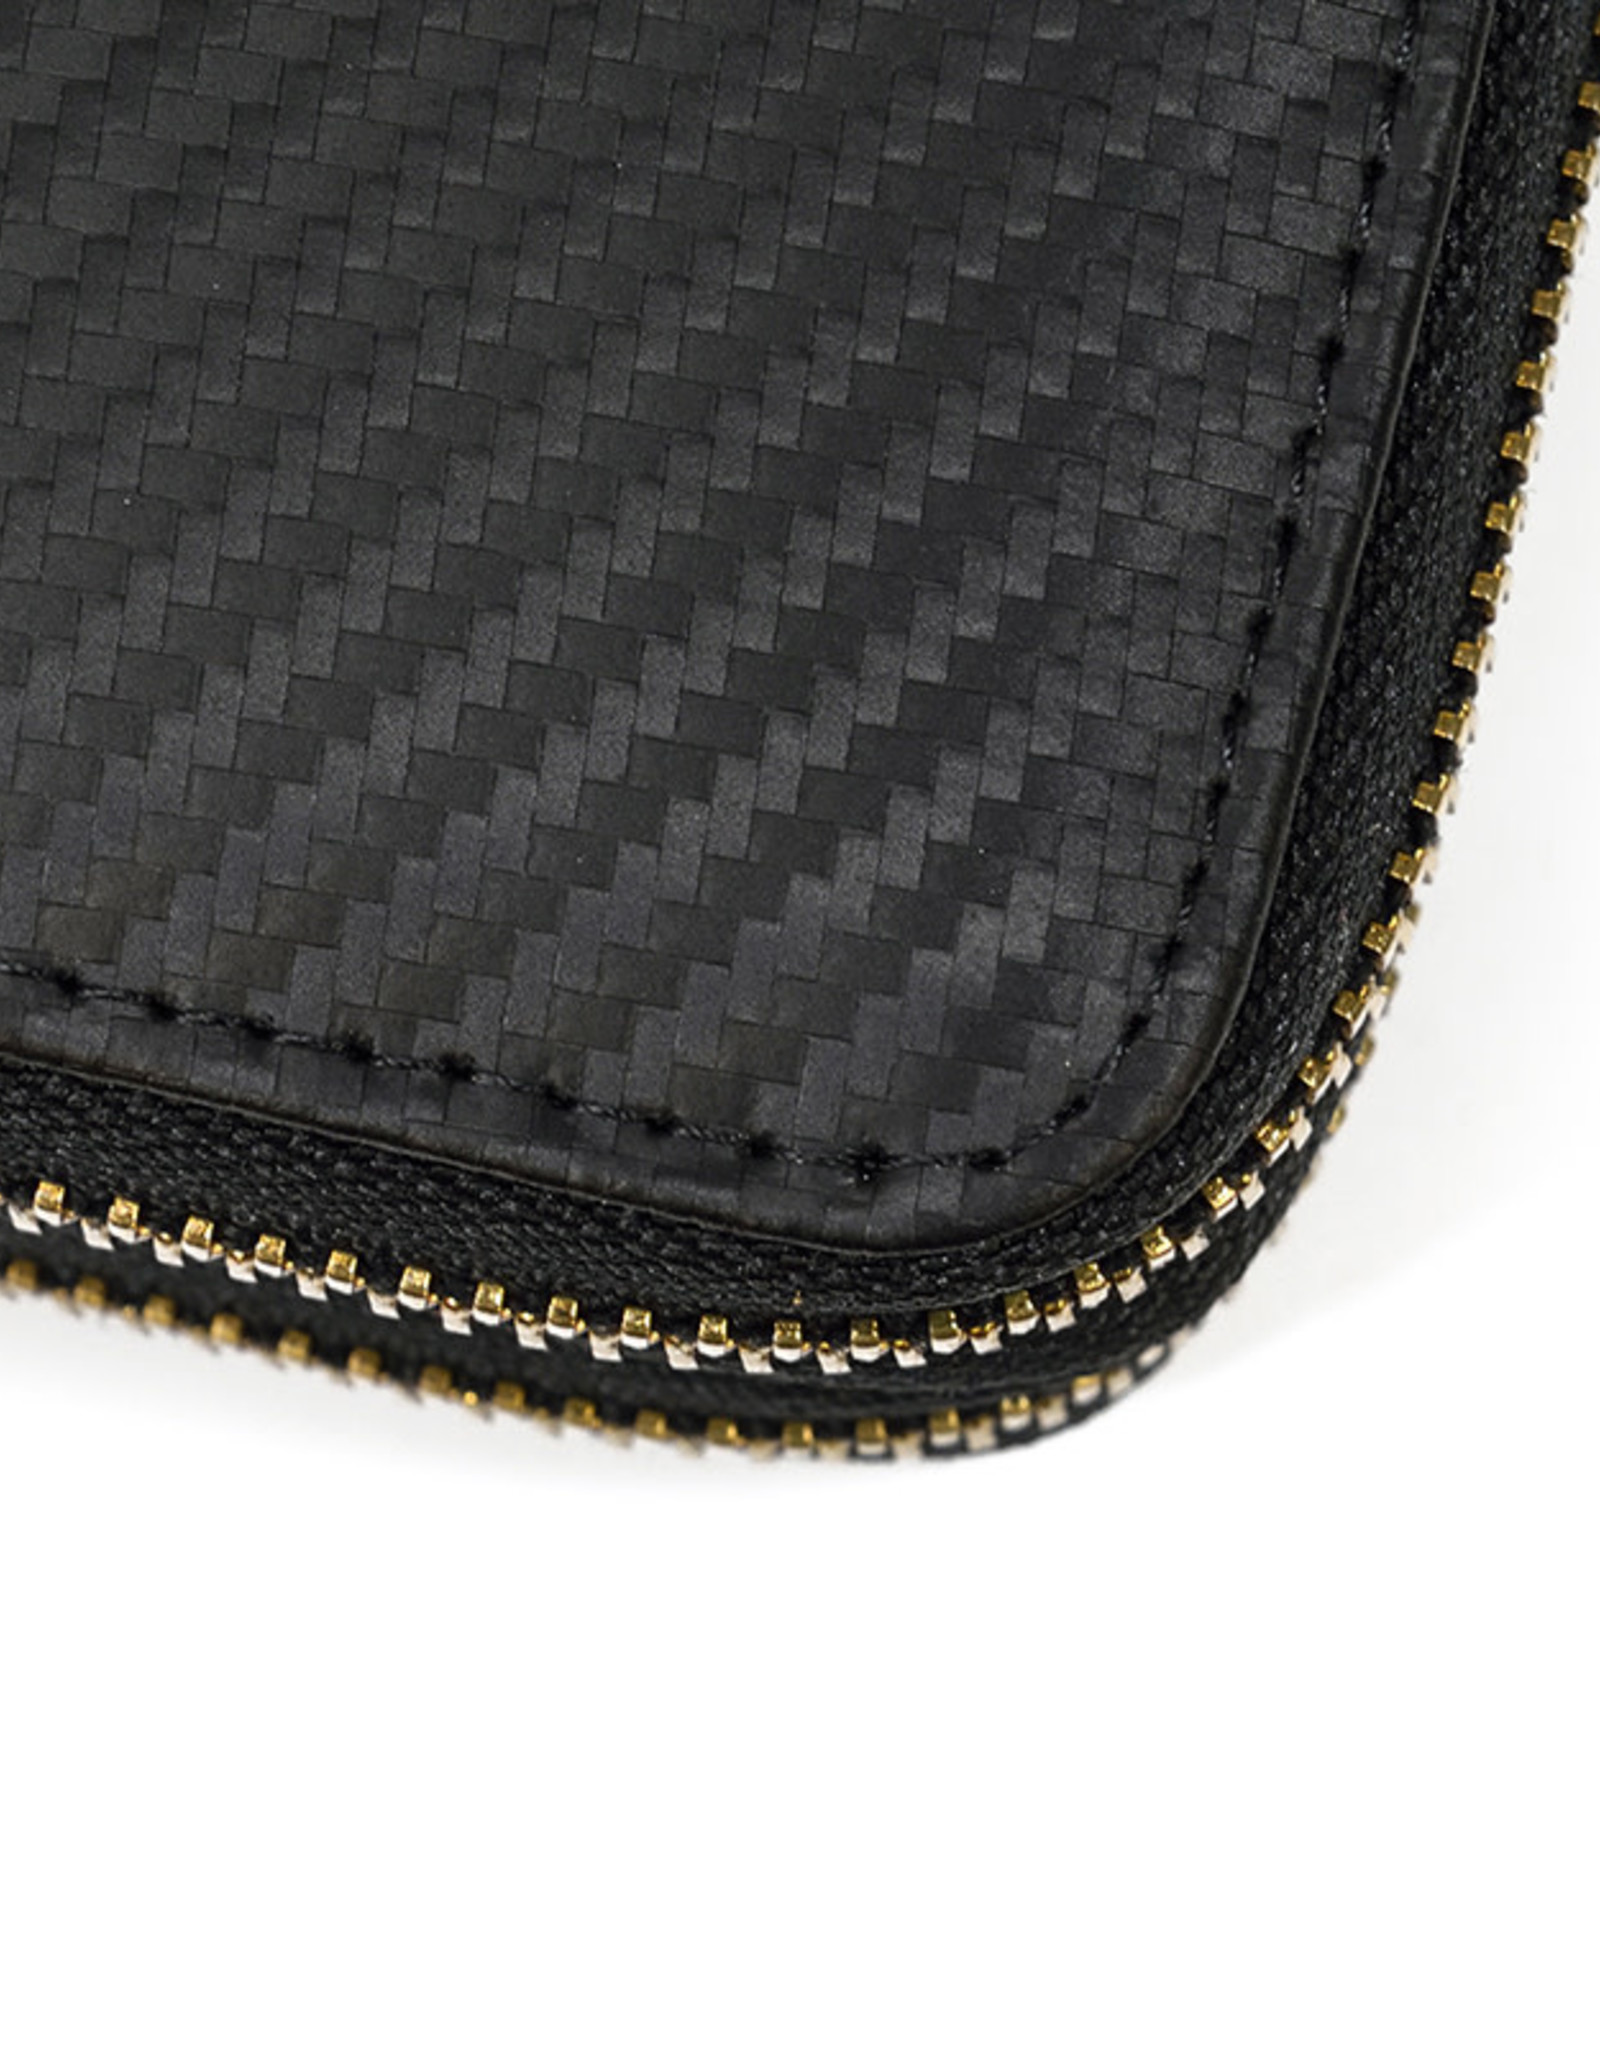 Andrew Long Wallet Gold Zipper Carbon Leather